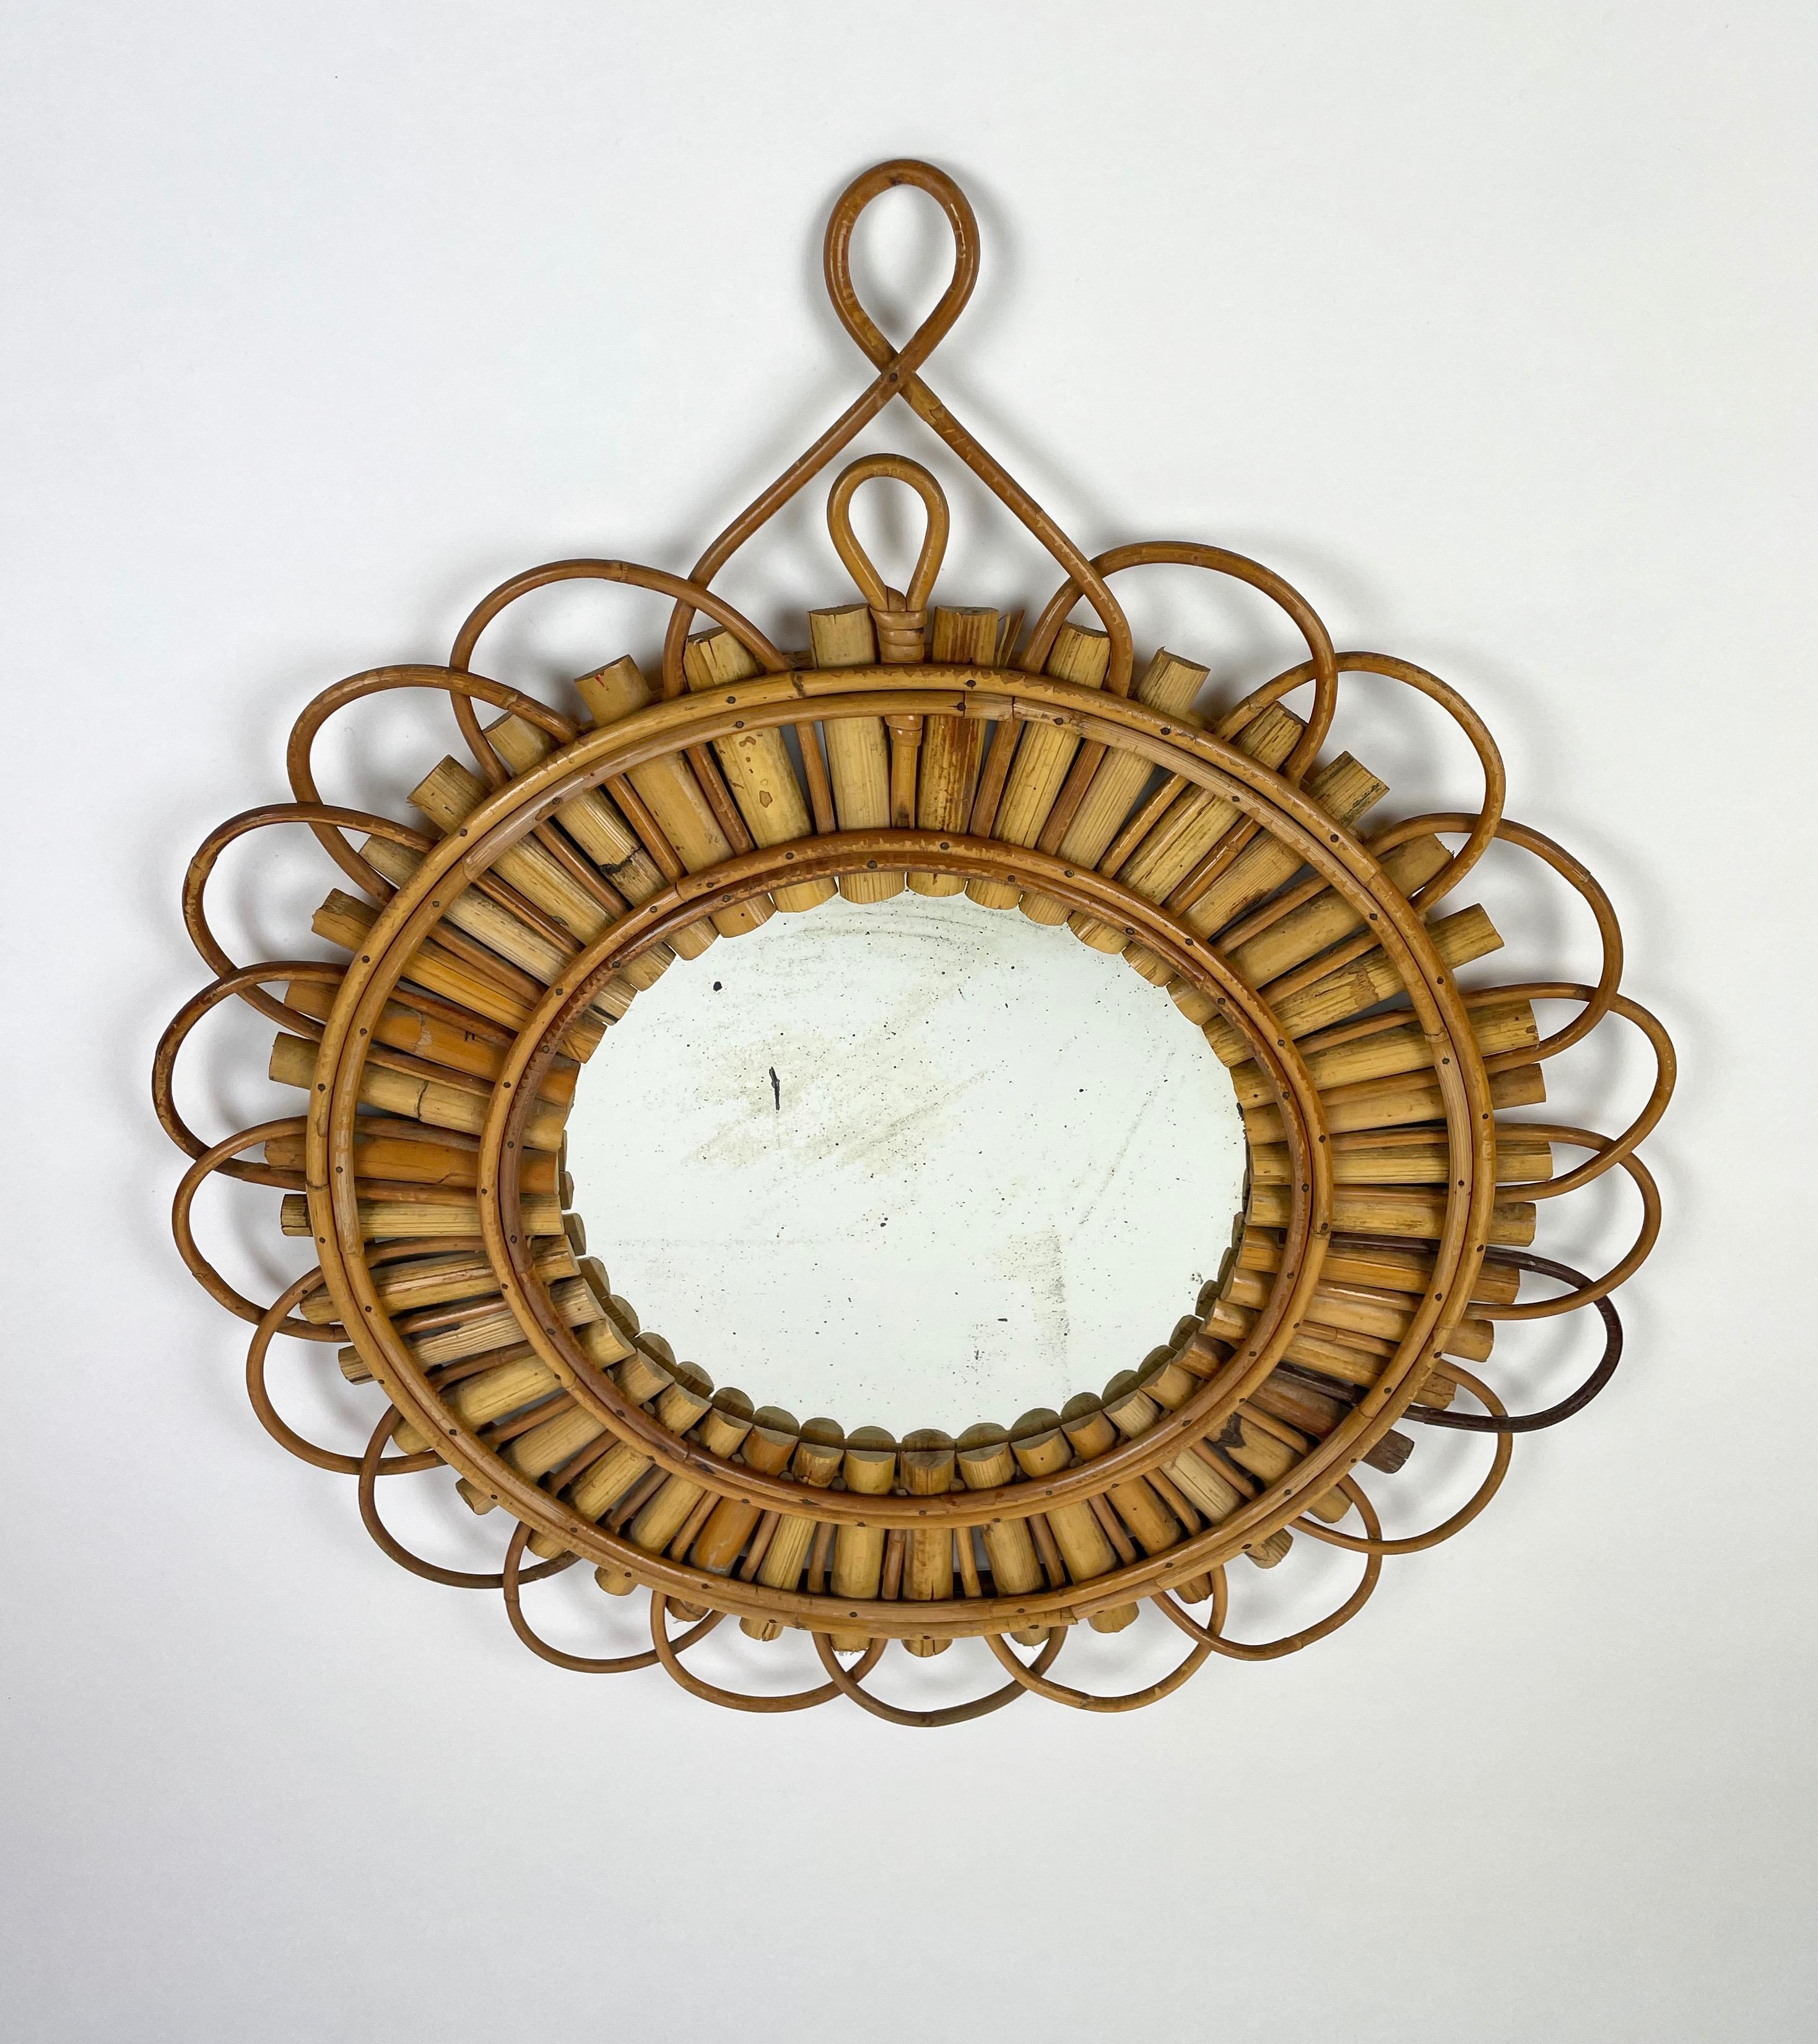 Wall mirror sunburst shaped in rattan bamboo, French Riviera, 1960s. The mirror has vintage-effect due to its age. 

Measures: Mirror diameter 25 cm.